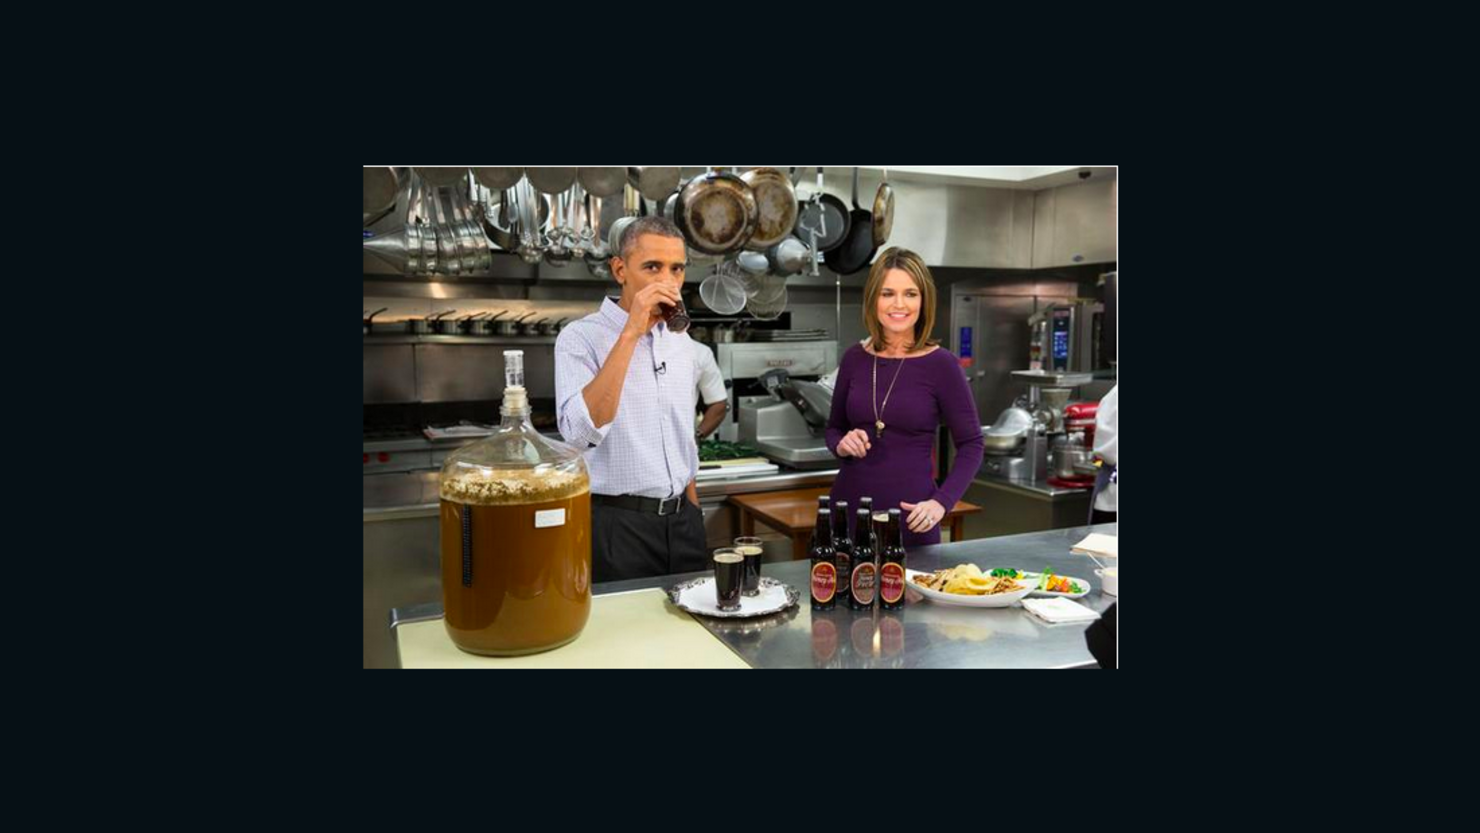 President Barack Obama swigs some beer before the Super Bowl with NBC's Savannah Guthrie.